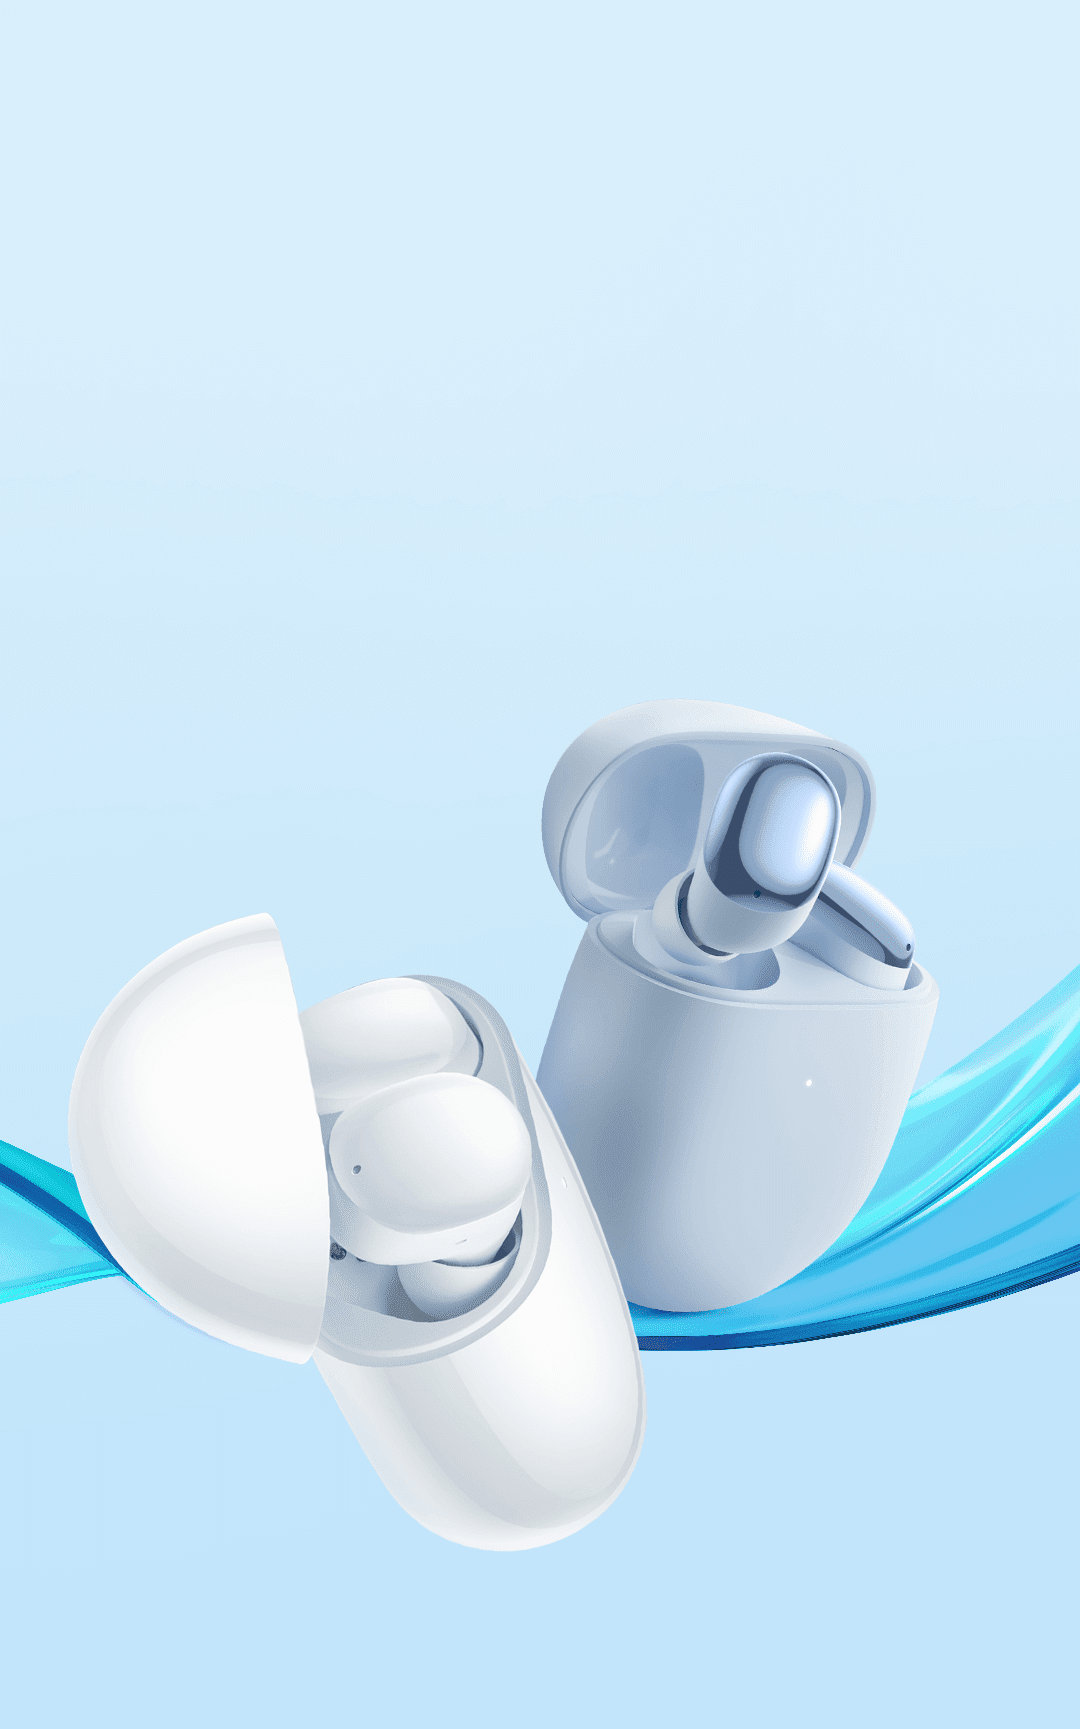 Redmi Buds 4 Active: Enjoy immersive sound with active noise cancellation